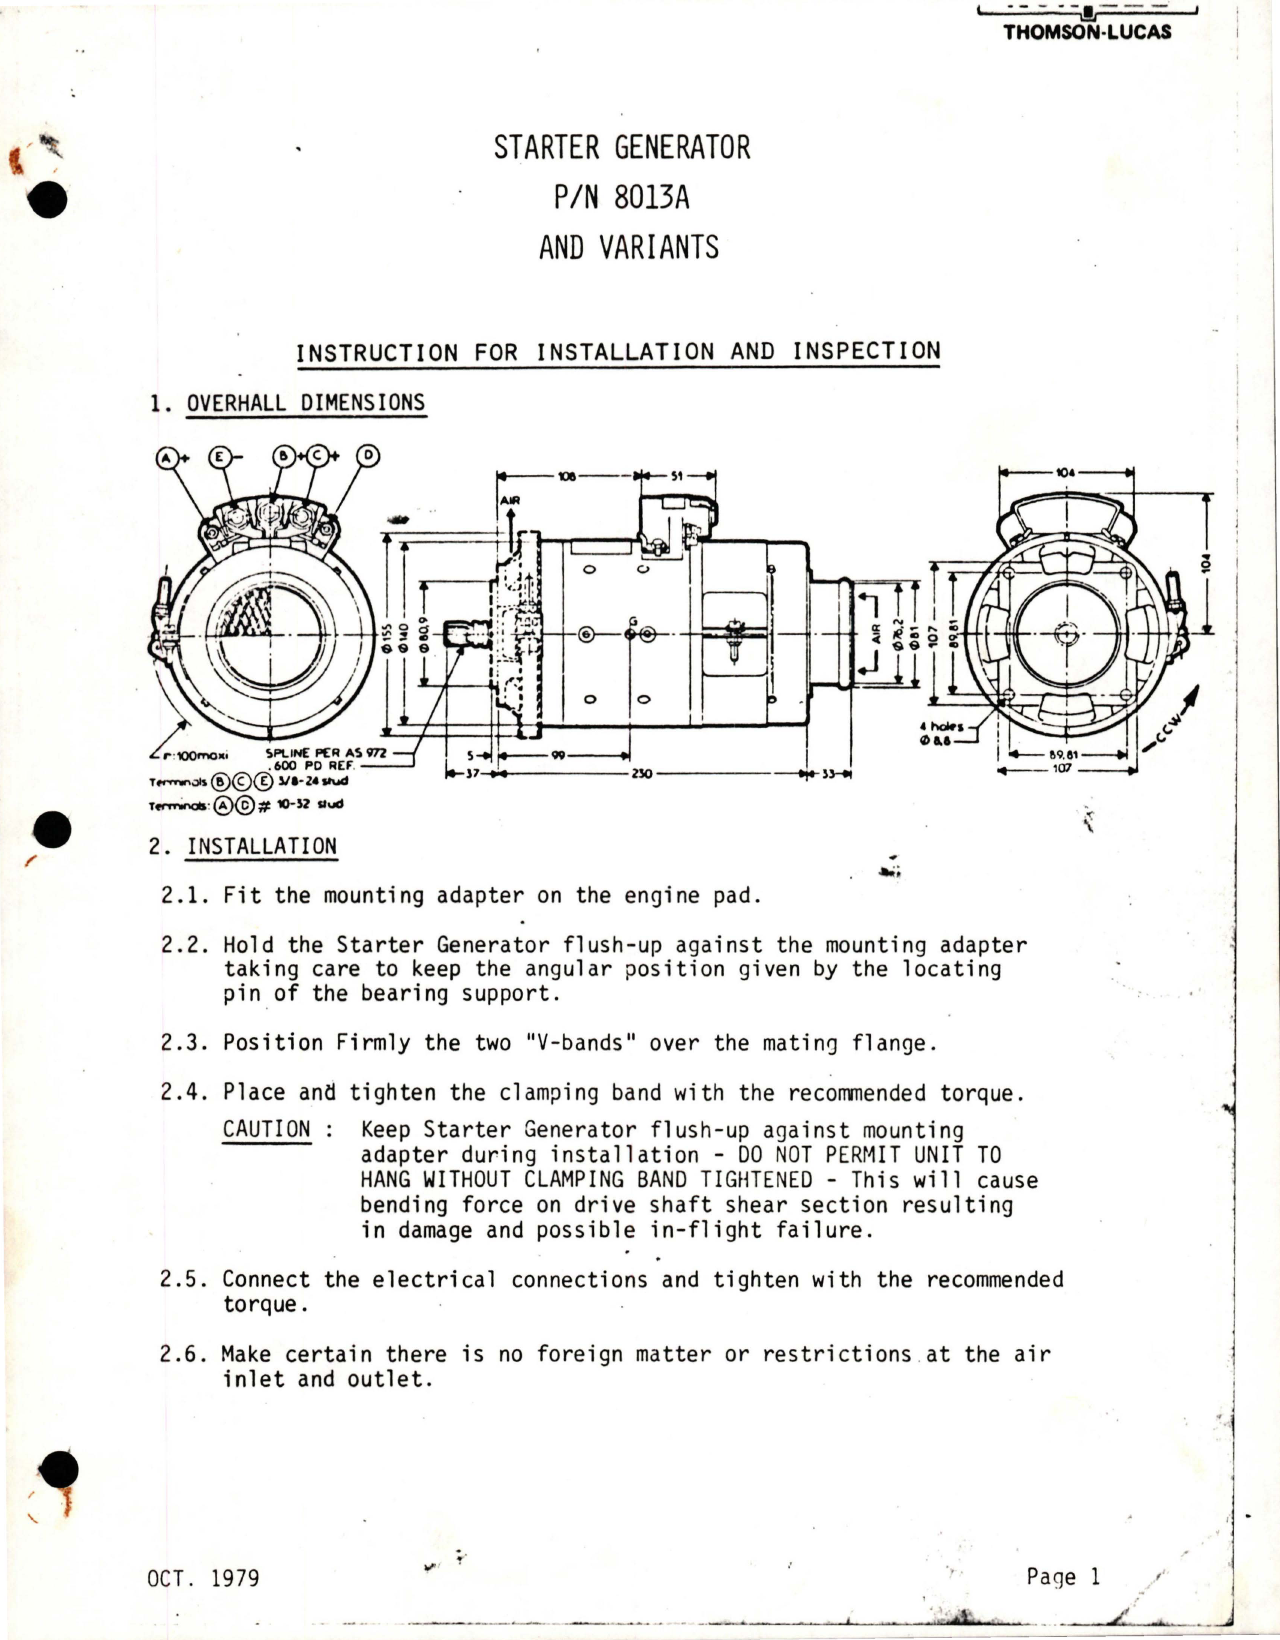 Sample page 1 from AirCorps Library document: Instructions for Installation and Inspection for Starter Generator - Part 8013A